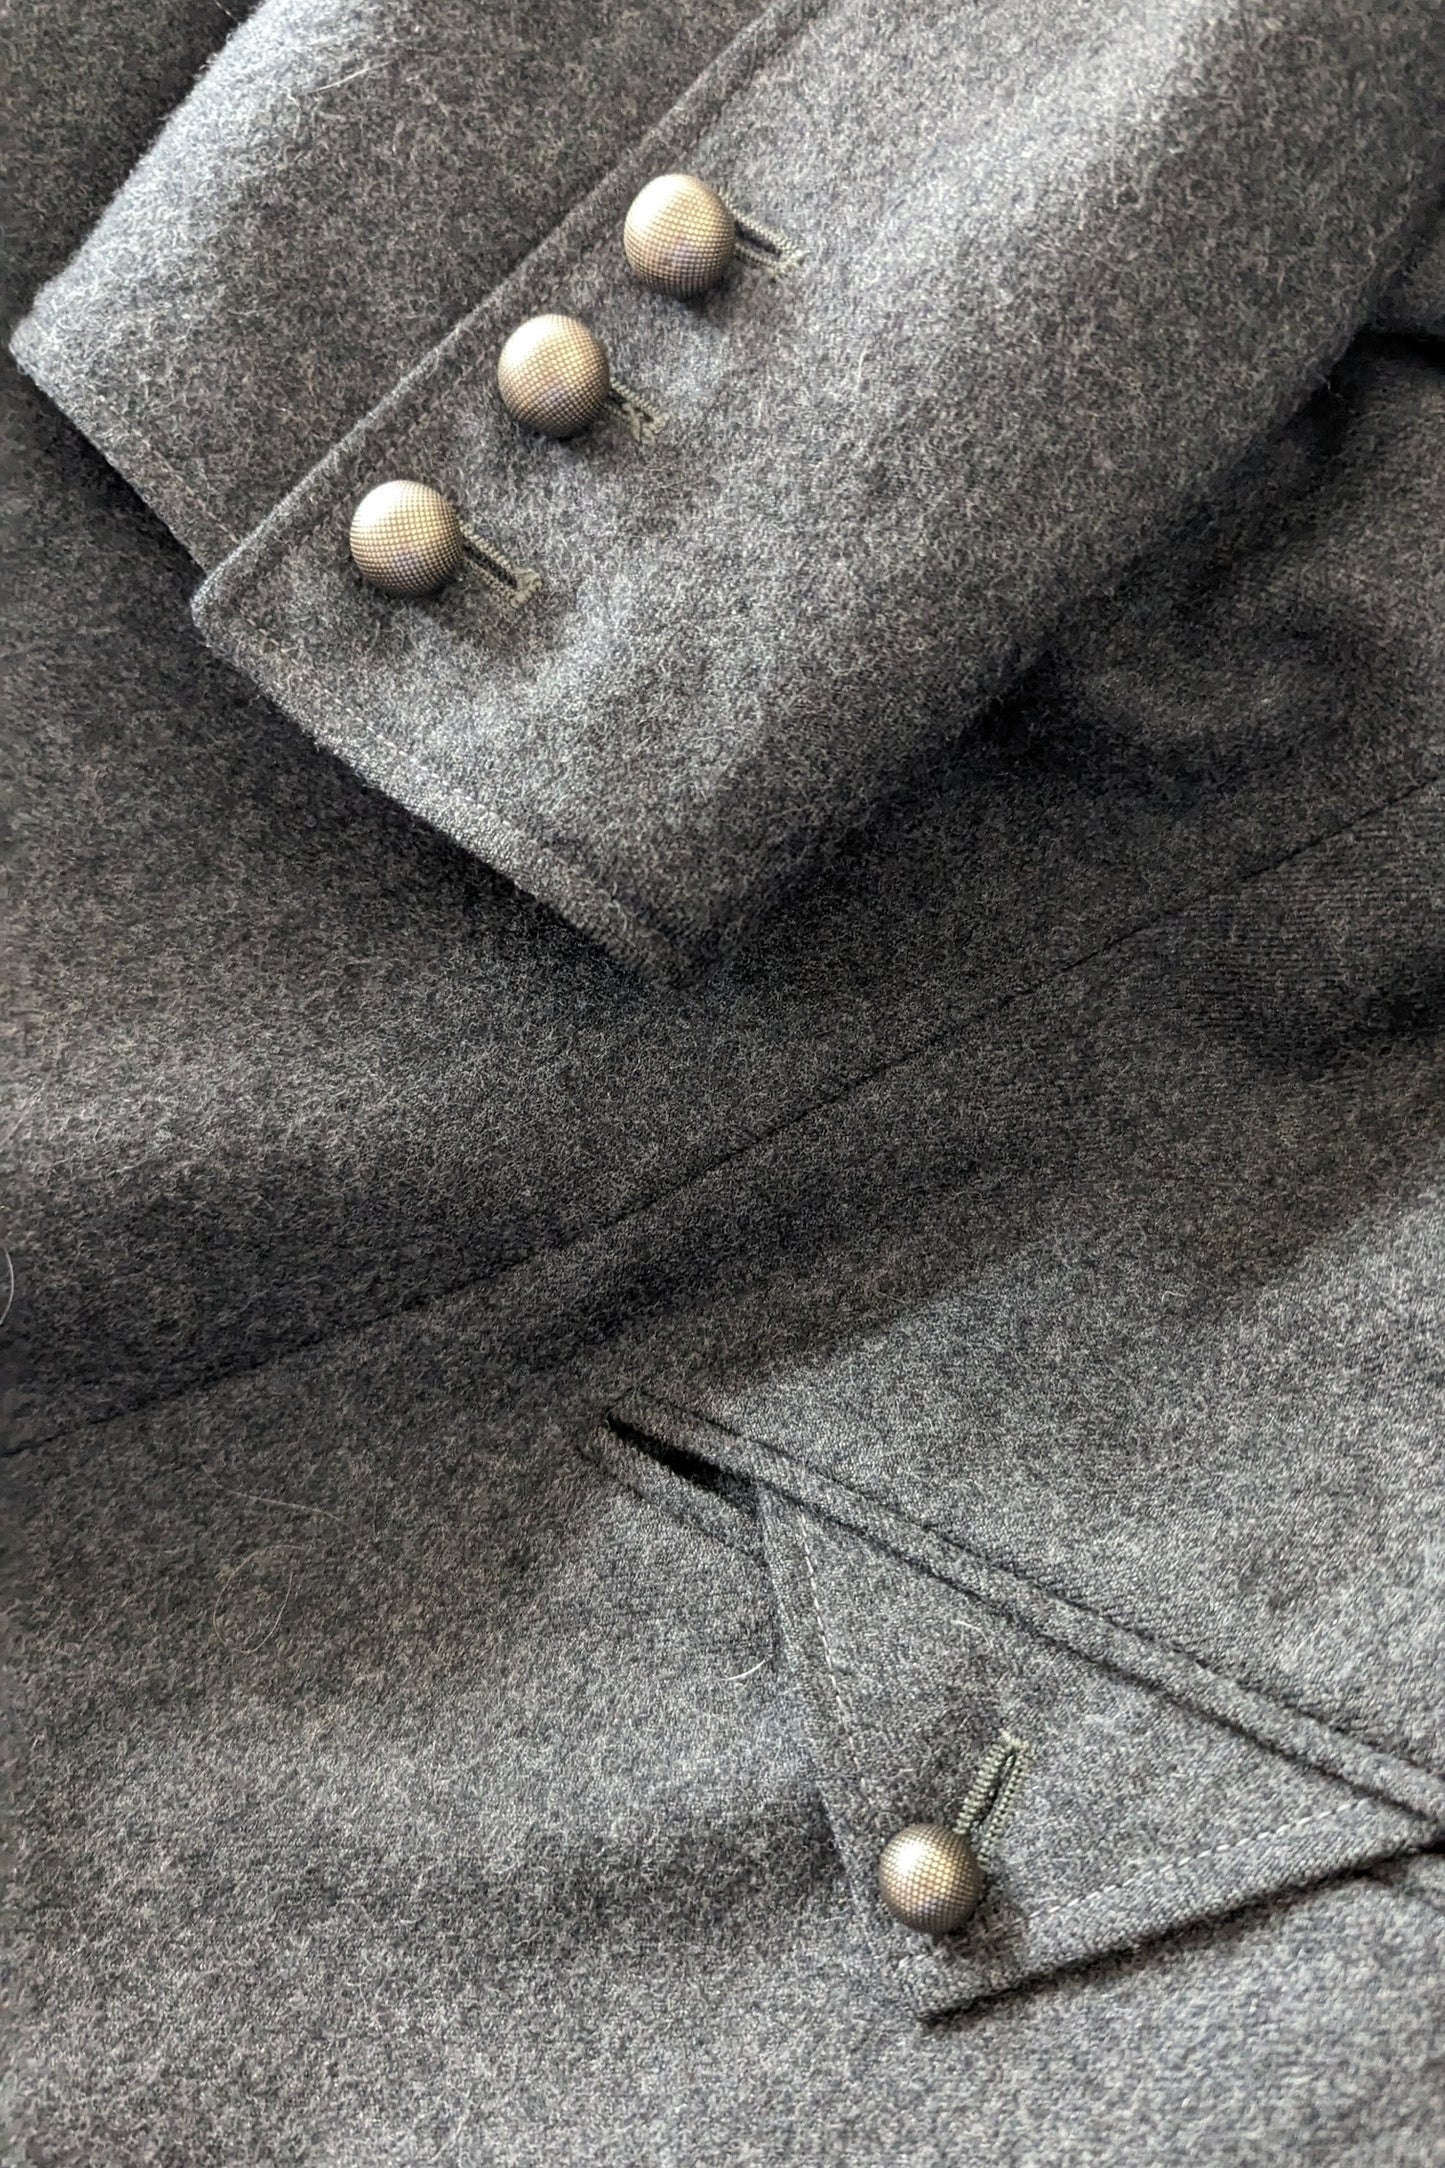 Sliver buttons on Louis Feraud coat